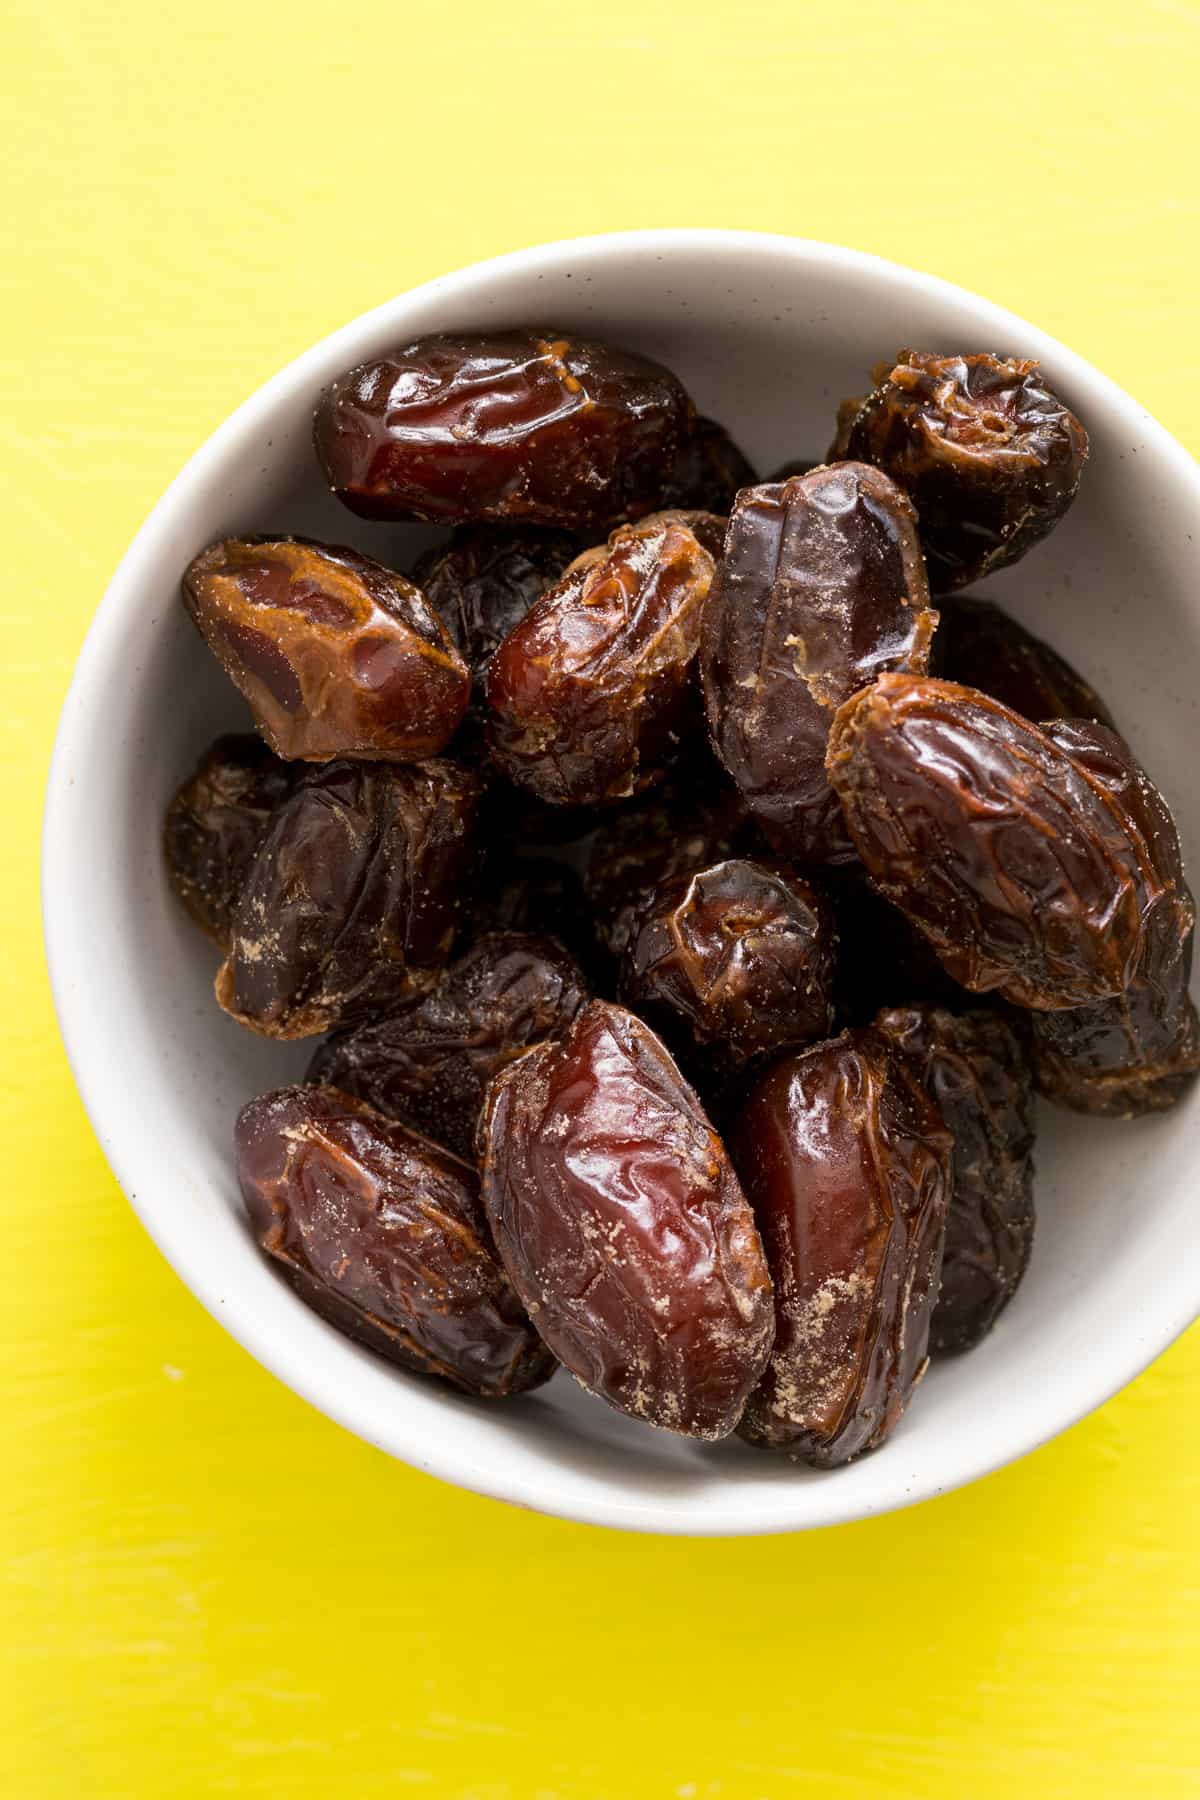 Dates in white bowl on green background.